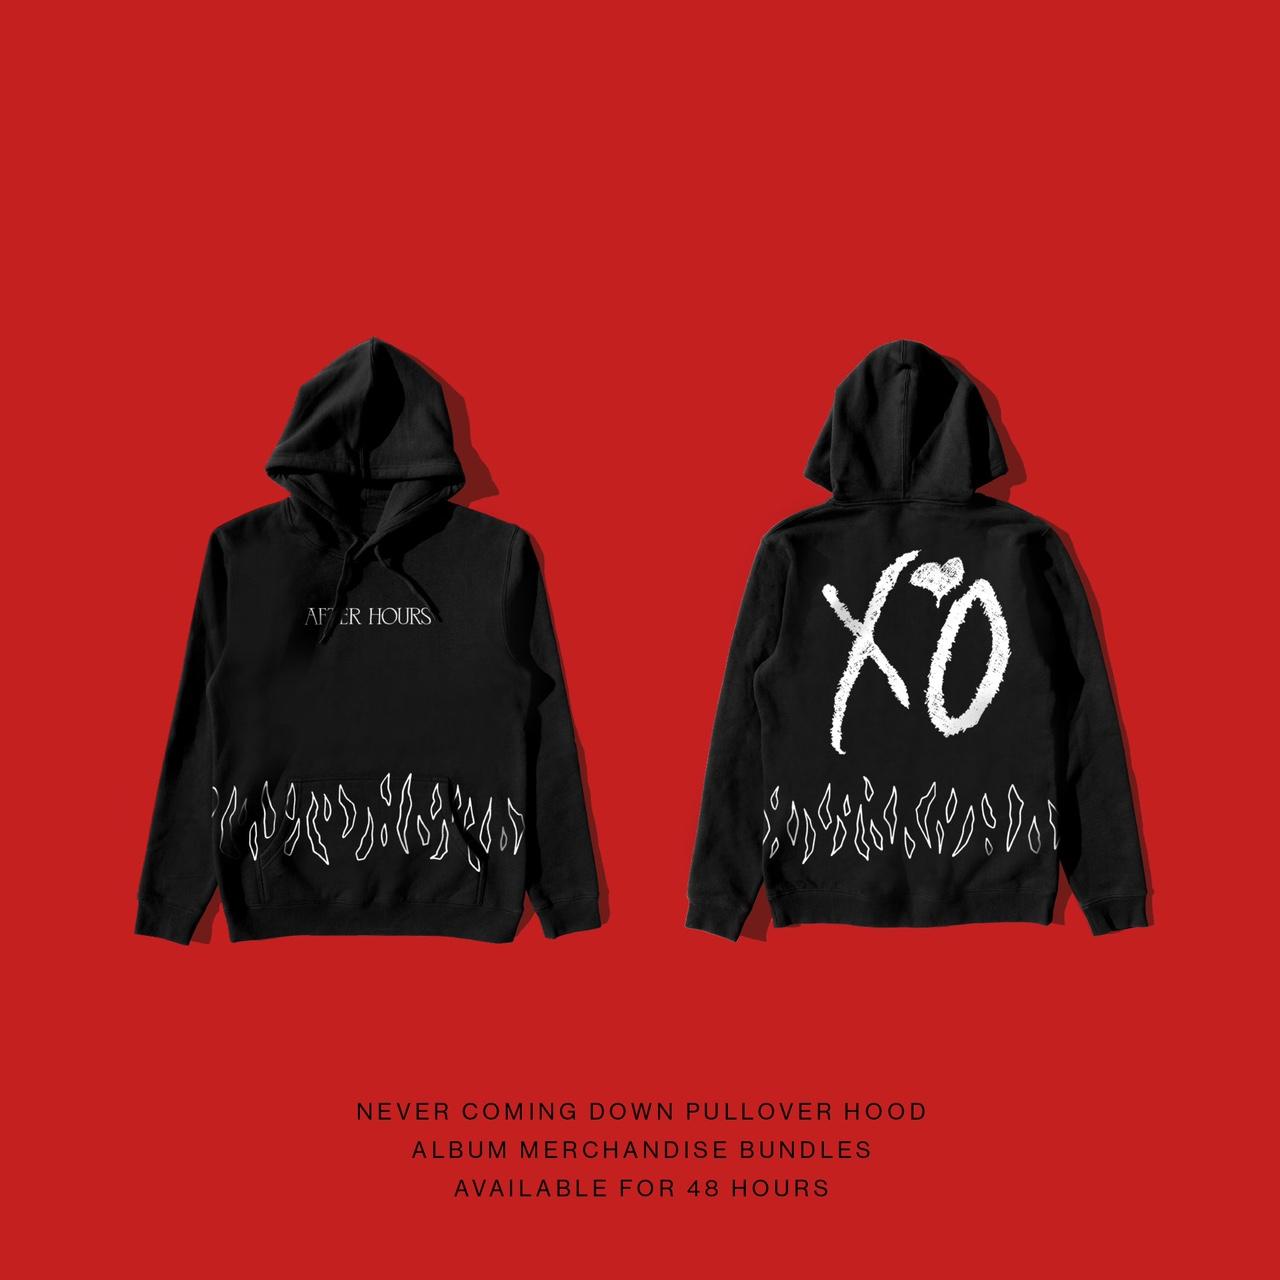 The Weeknd XO After Hours Hoodie - For Men or Women 